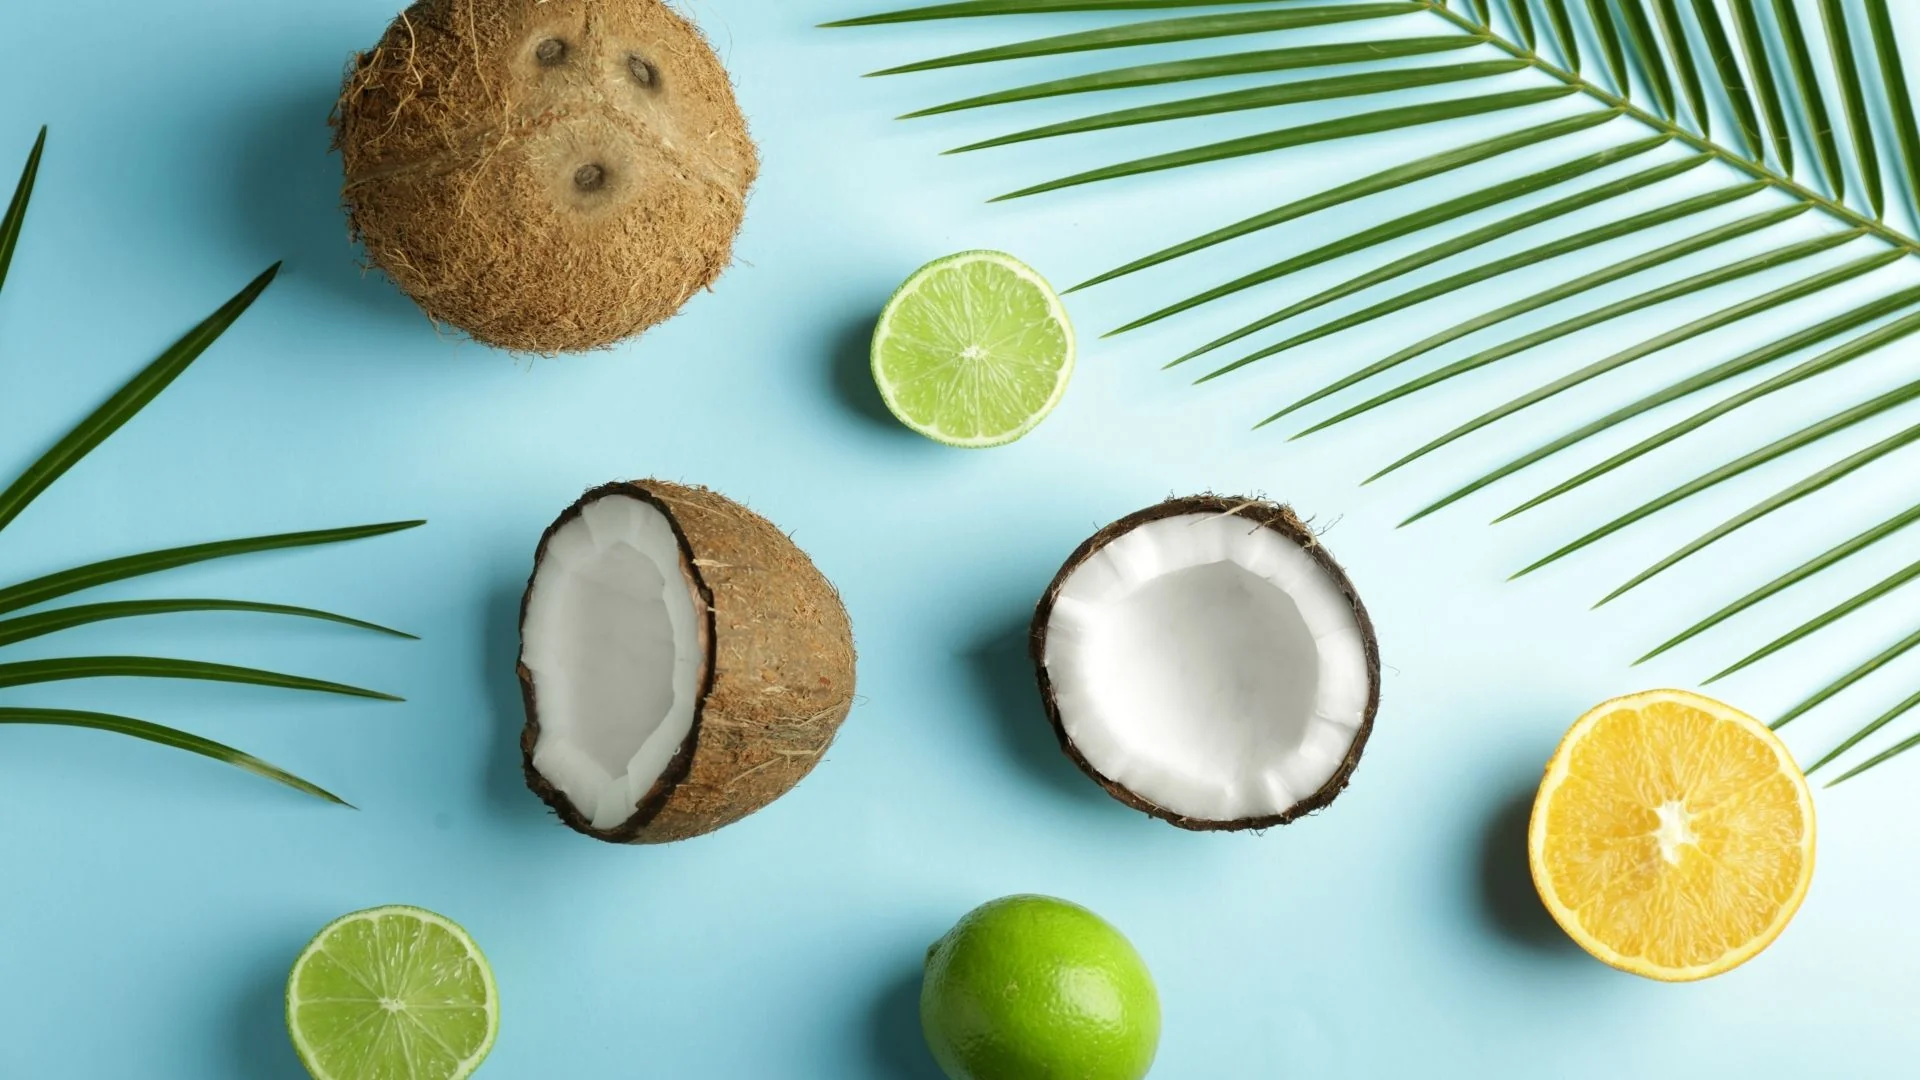 General 1920x1080 coconuts palm frond lime simple background food fruit